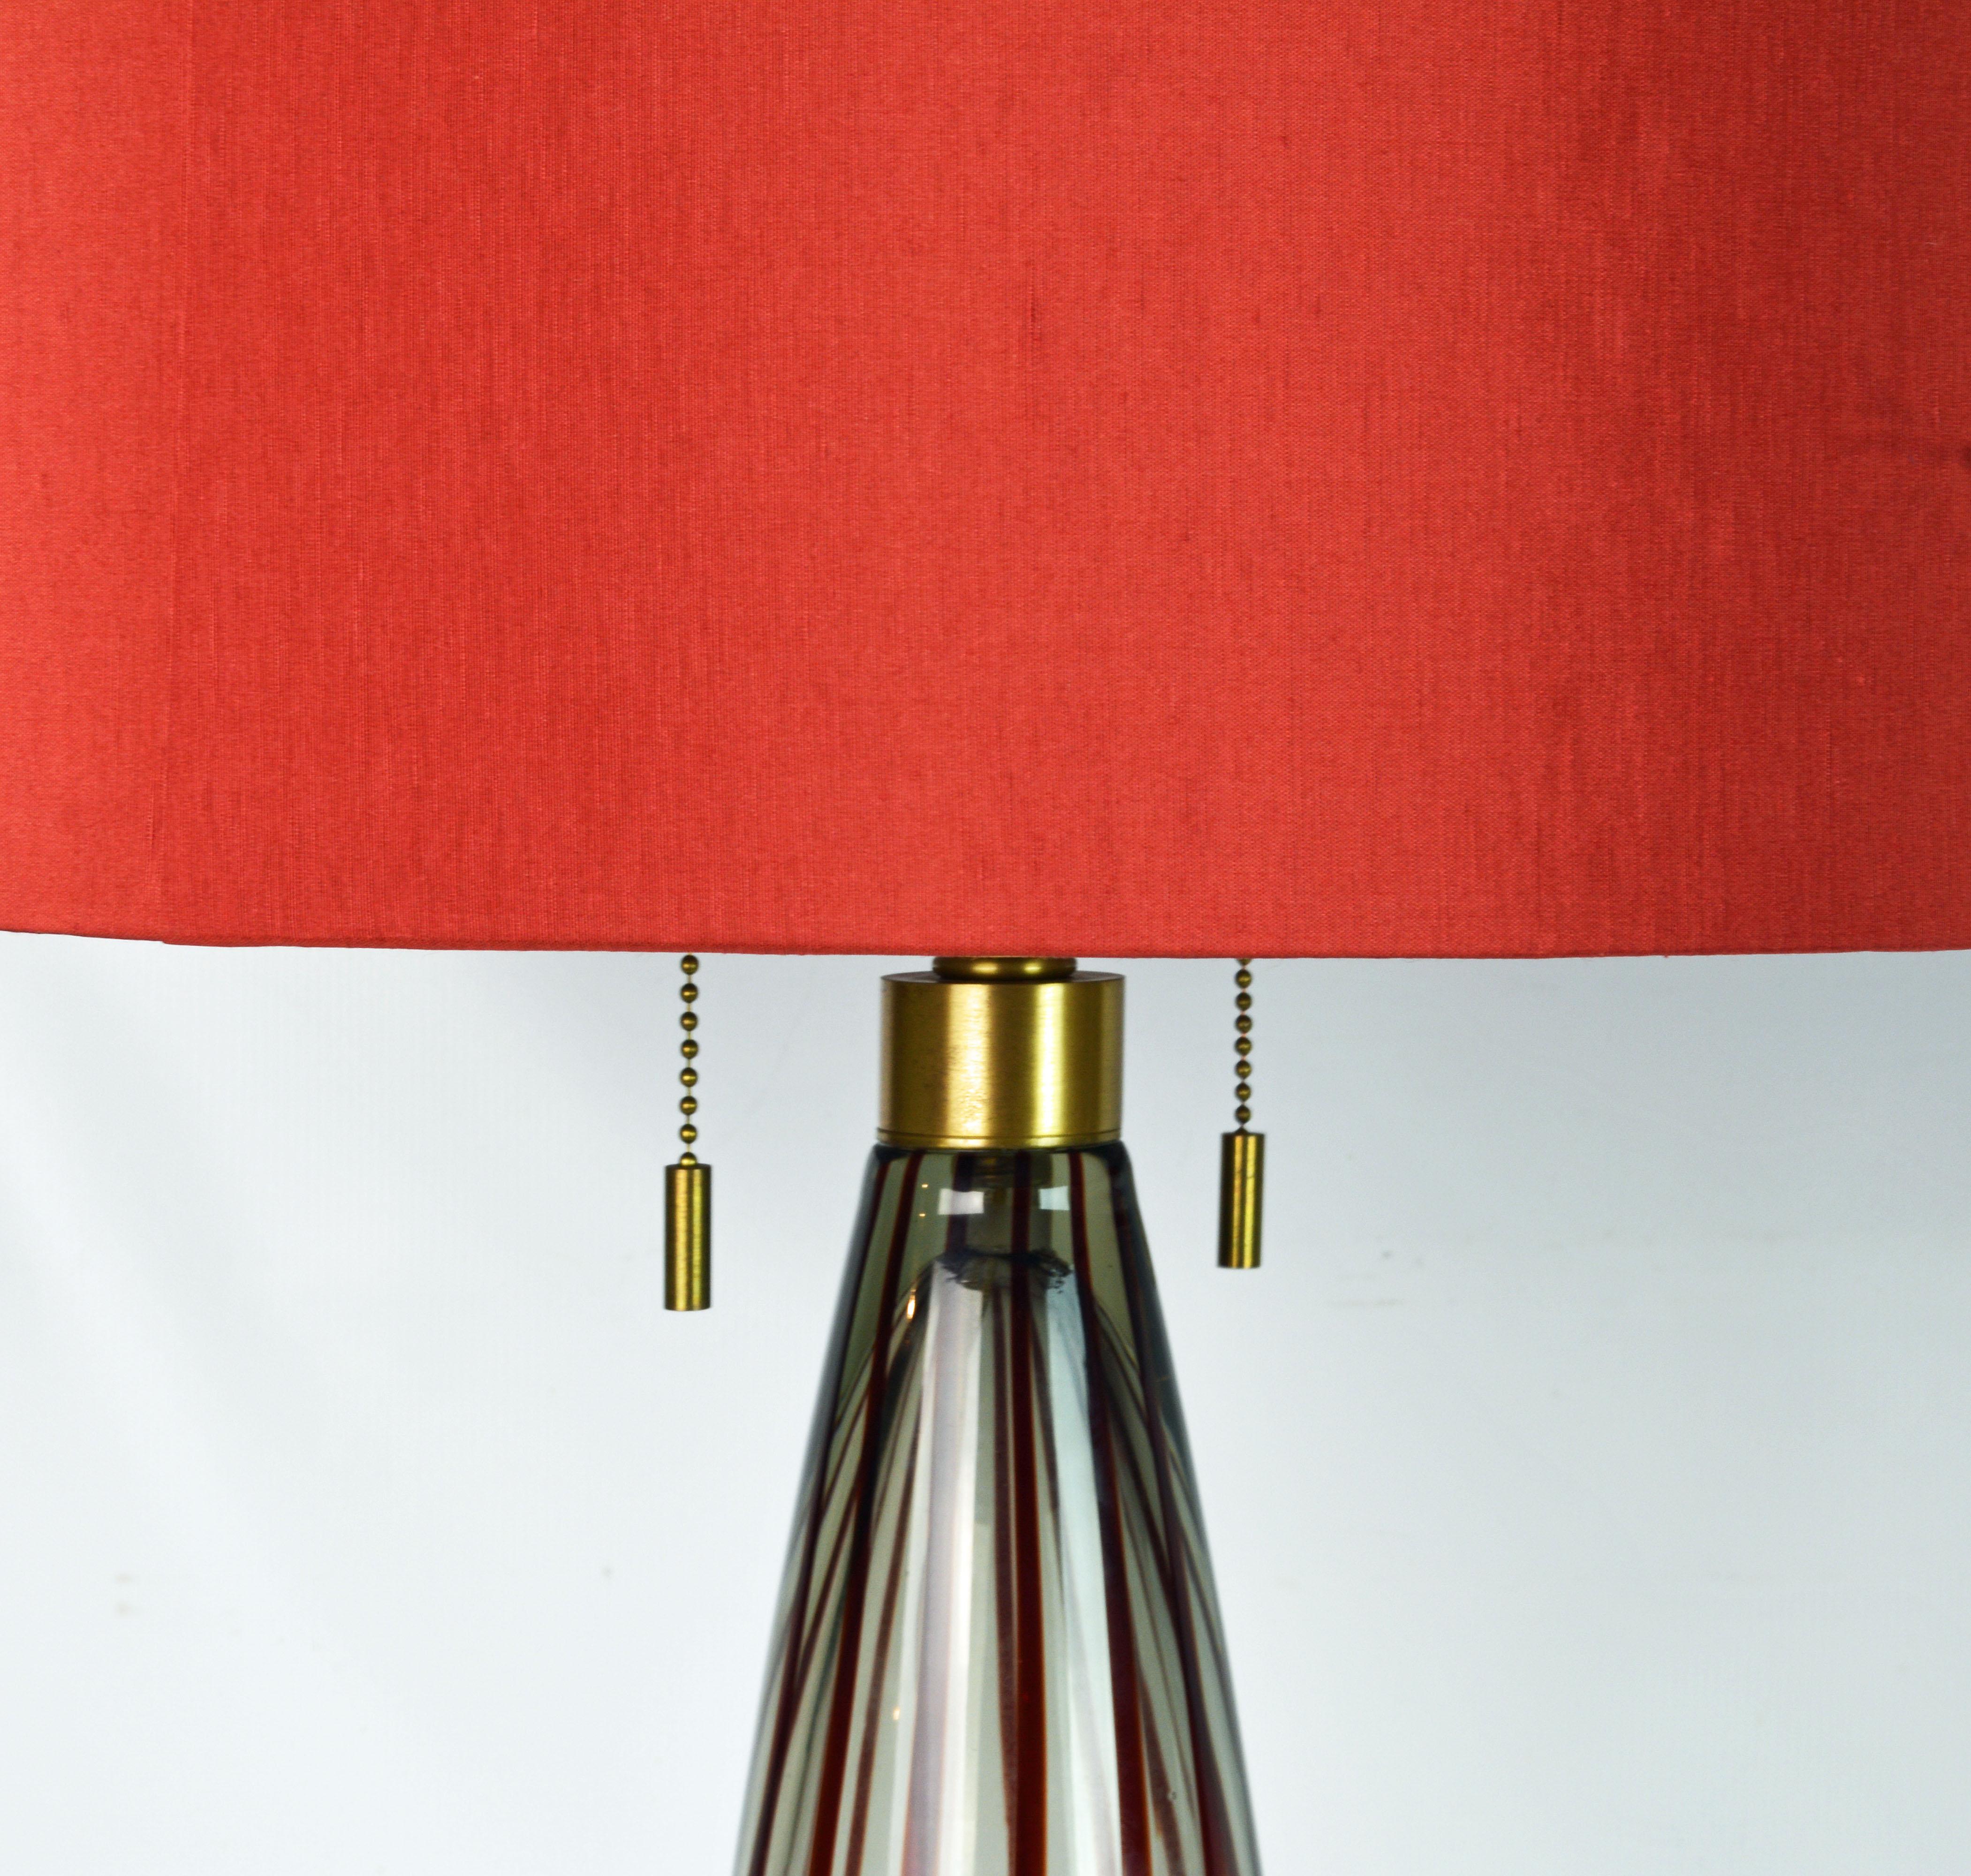 These Donghia lamps made in Murano Italy are very elegant with original red shades and red glass finial. Donghia are known for impeccable design and quality as demonstrated in these very tasteful lamps. They are etched Donghia near the bottom of